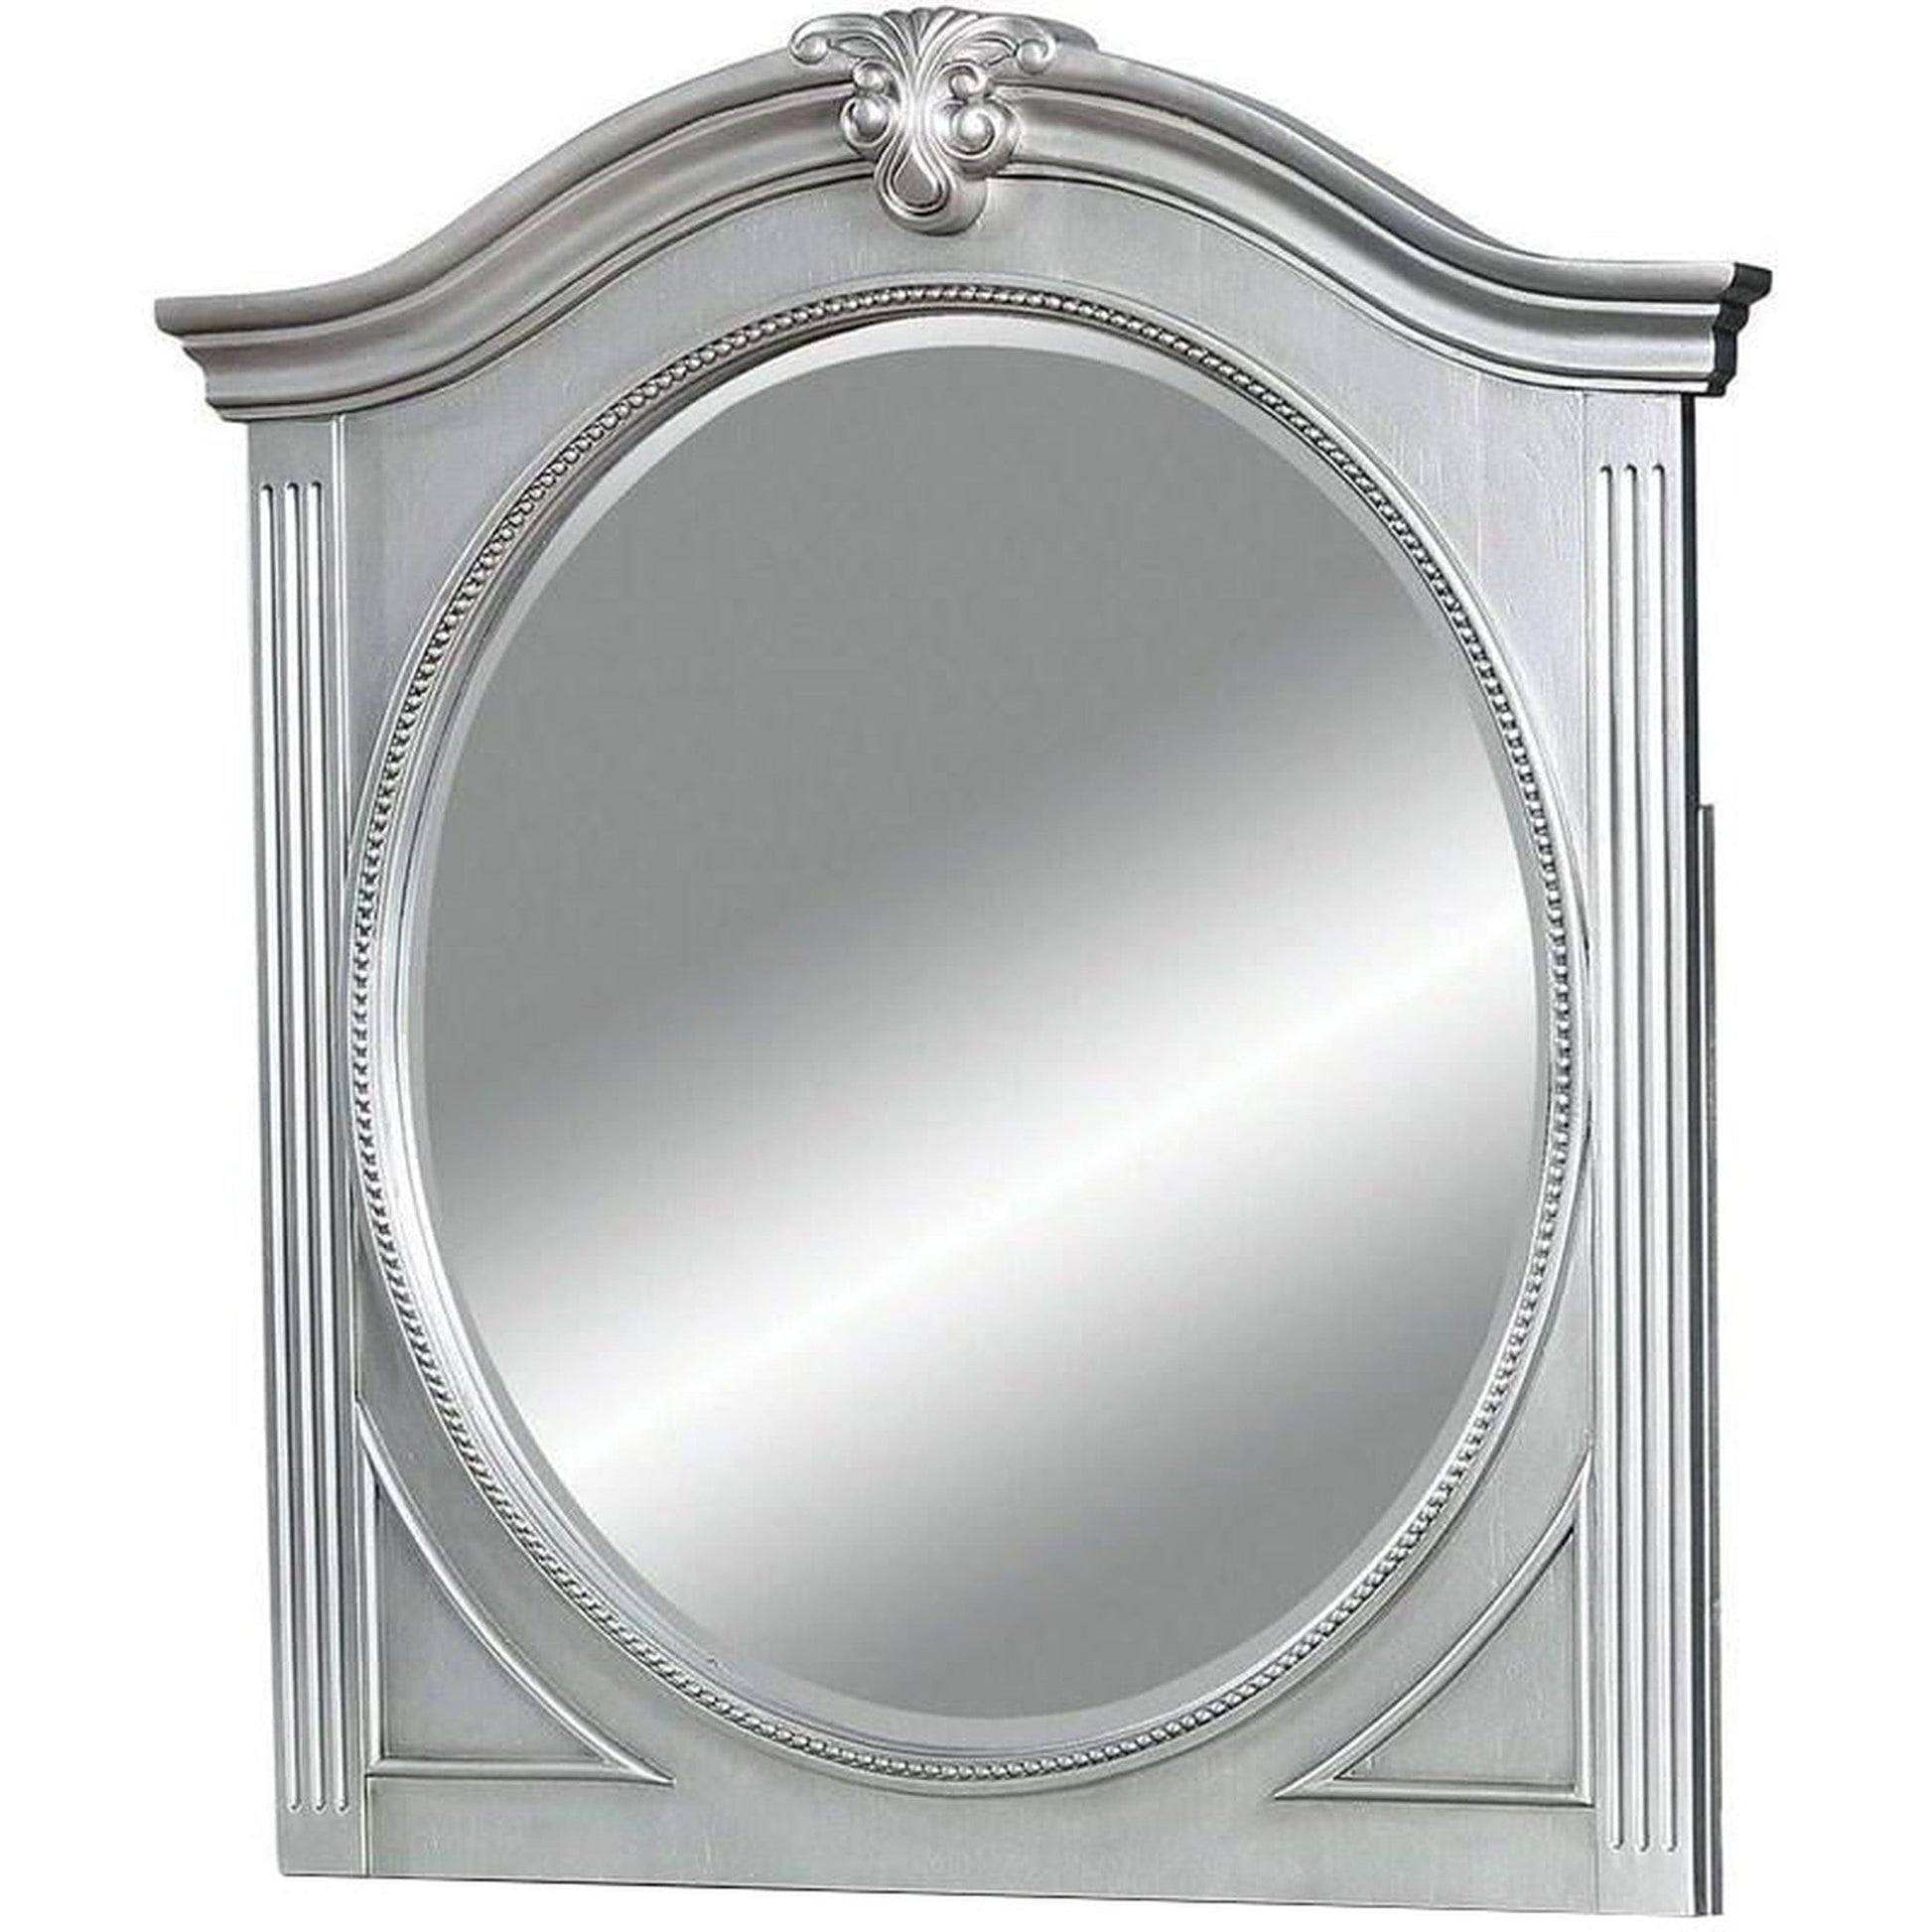 Benzara 43" Gray Wooden Frame Mirror With Carved Details